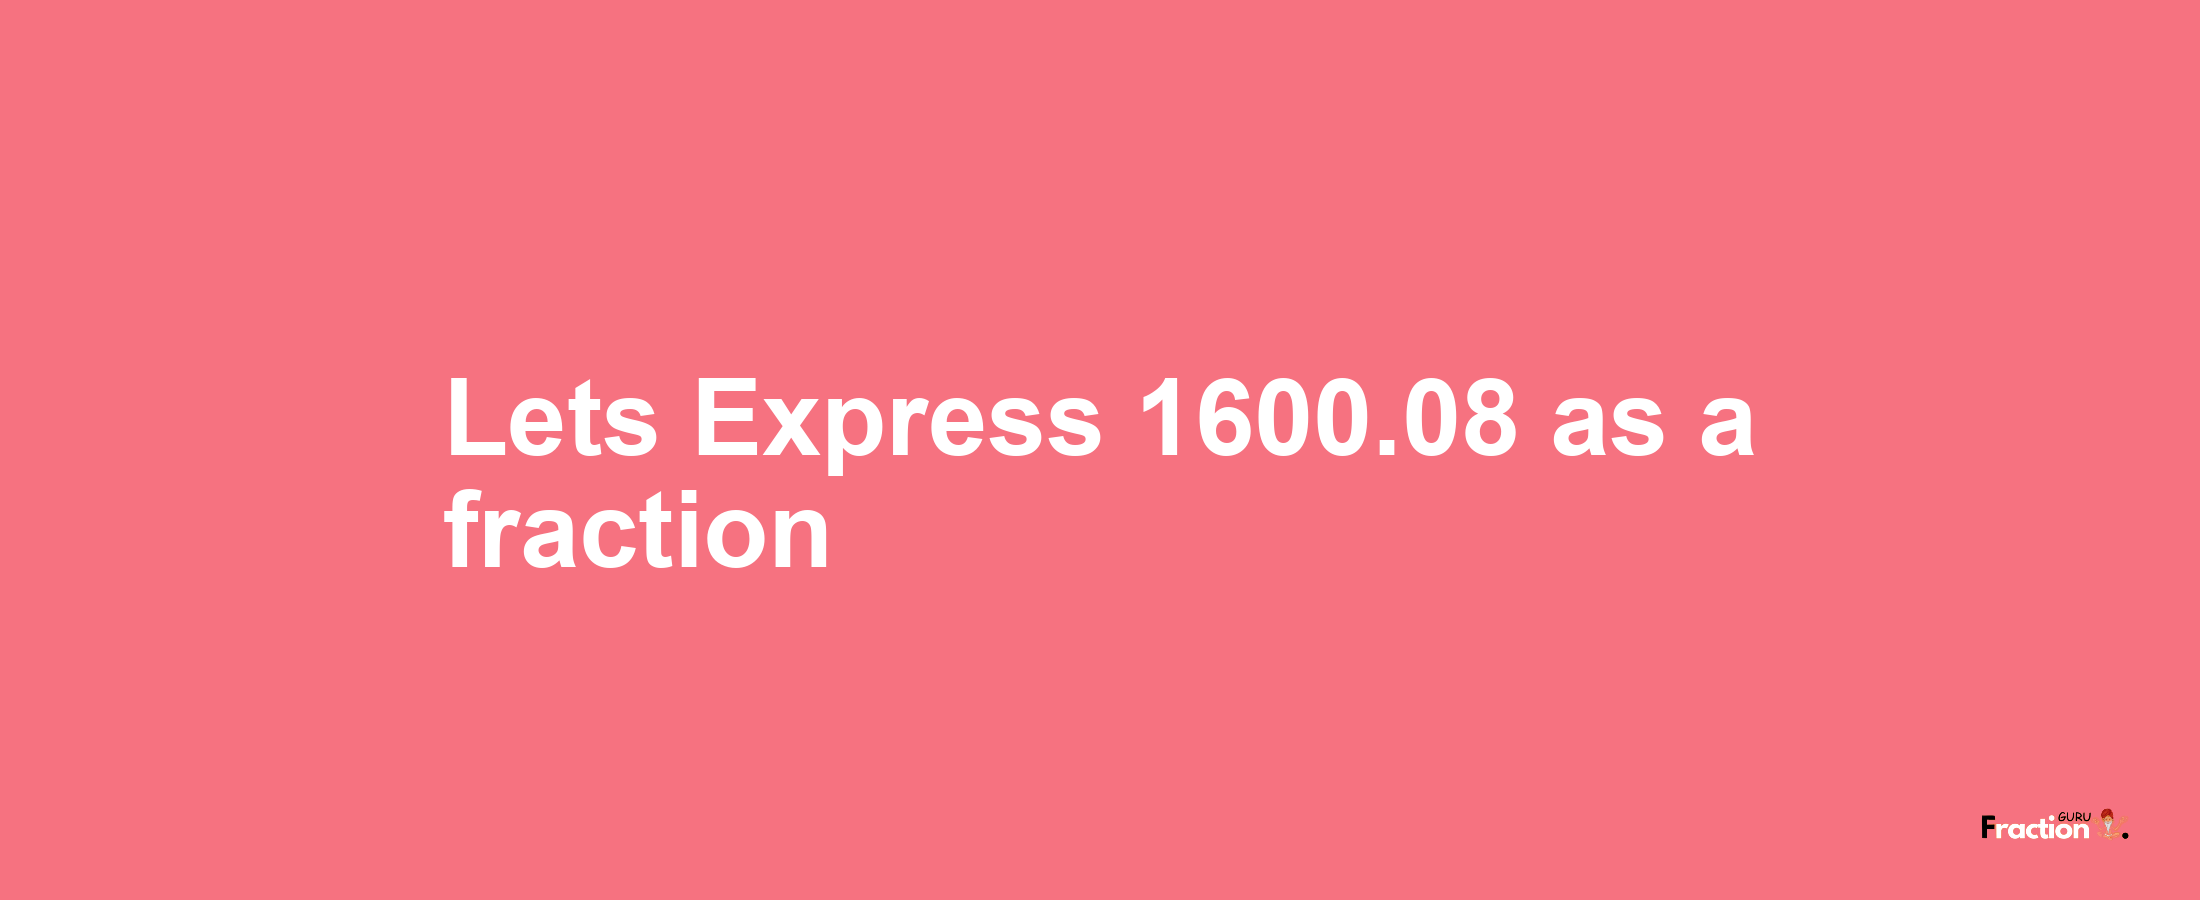 Lets Express 1600.08 as afraction